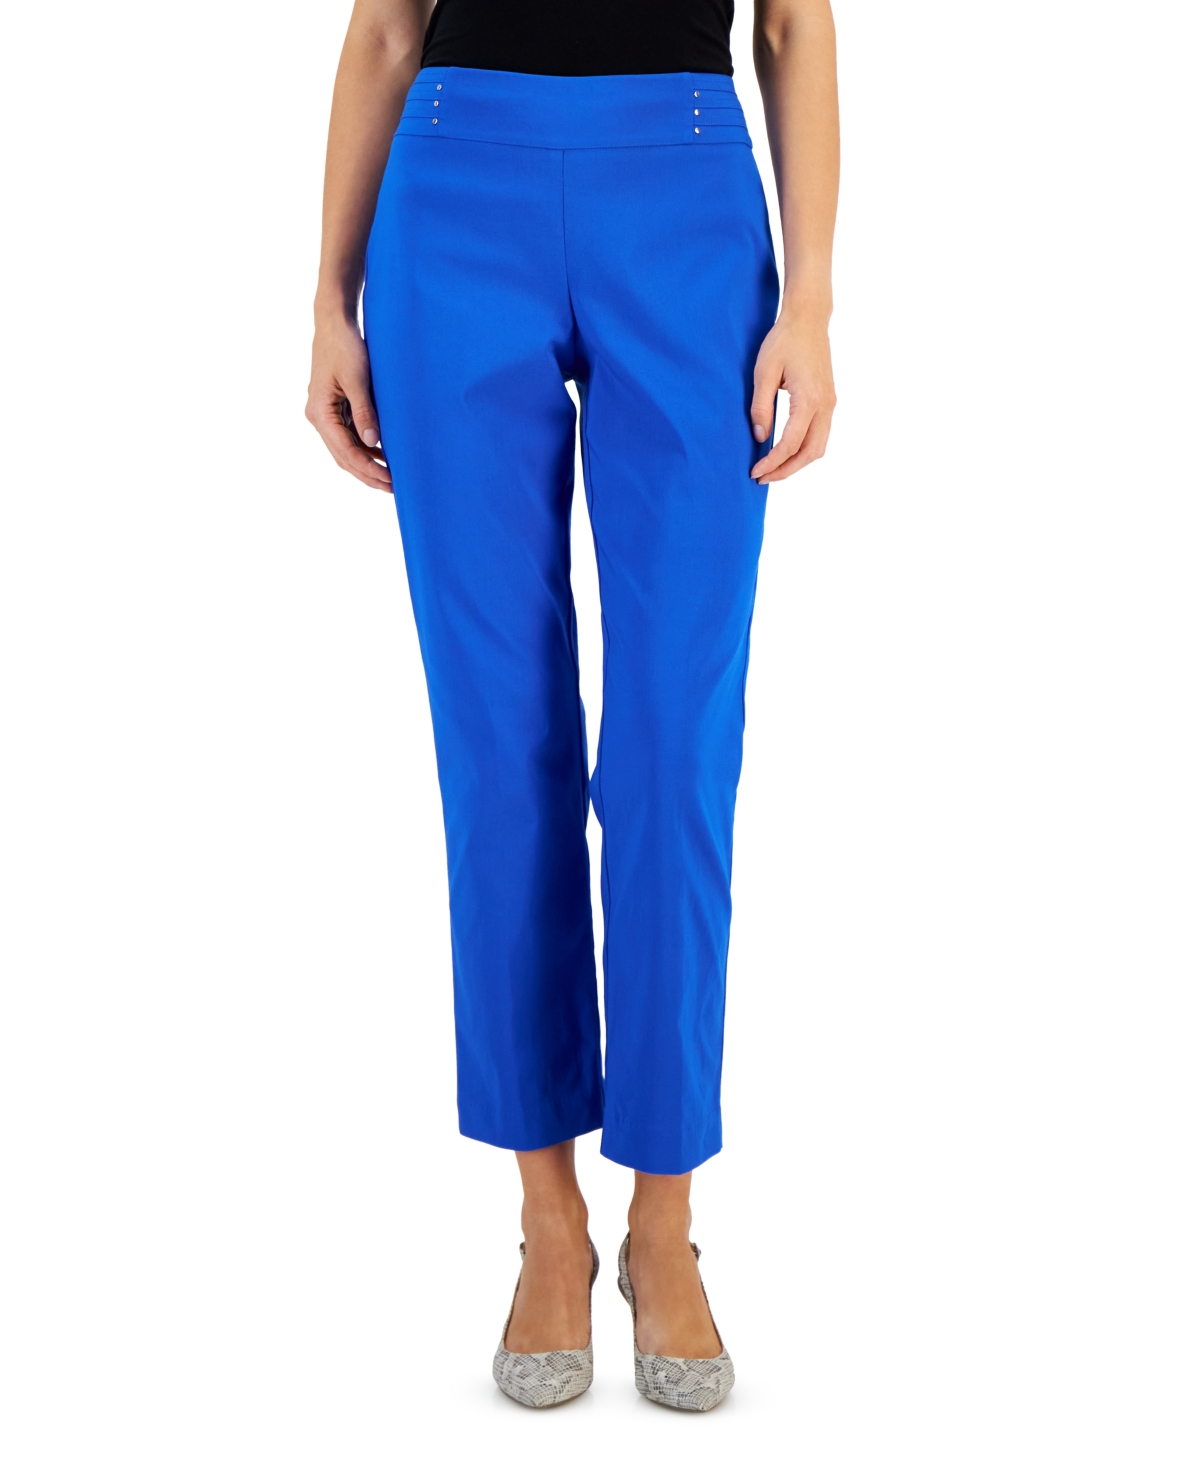 Jm Collection Petite Rivet-Detail Pull-On Ankle Pants, Created for Macy's |  Smart Closet